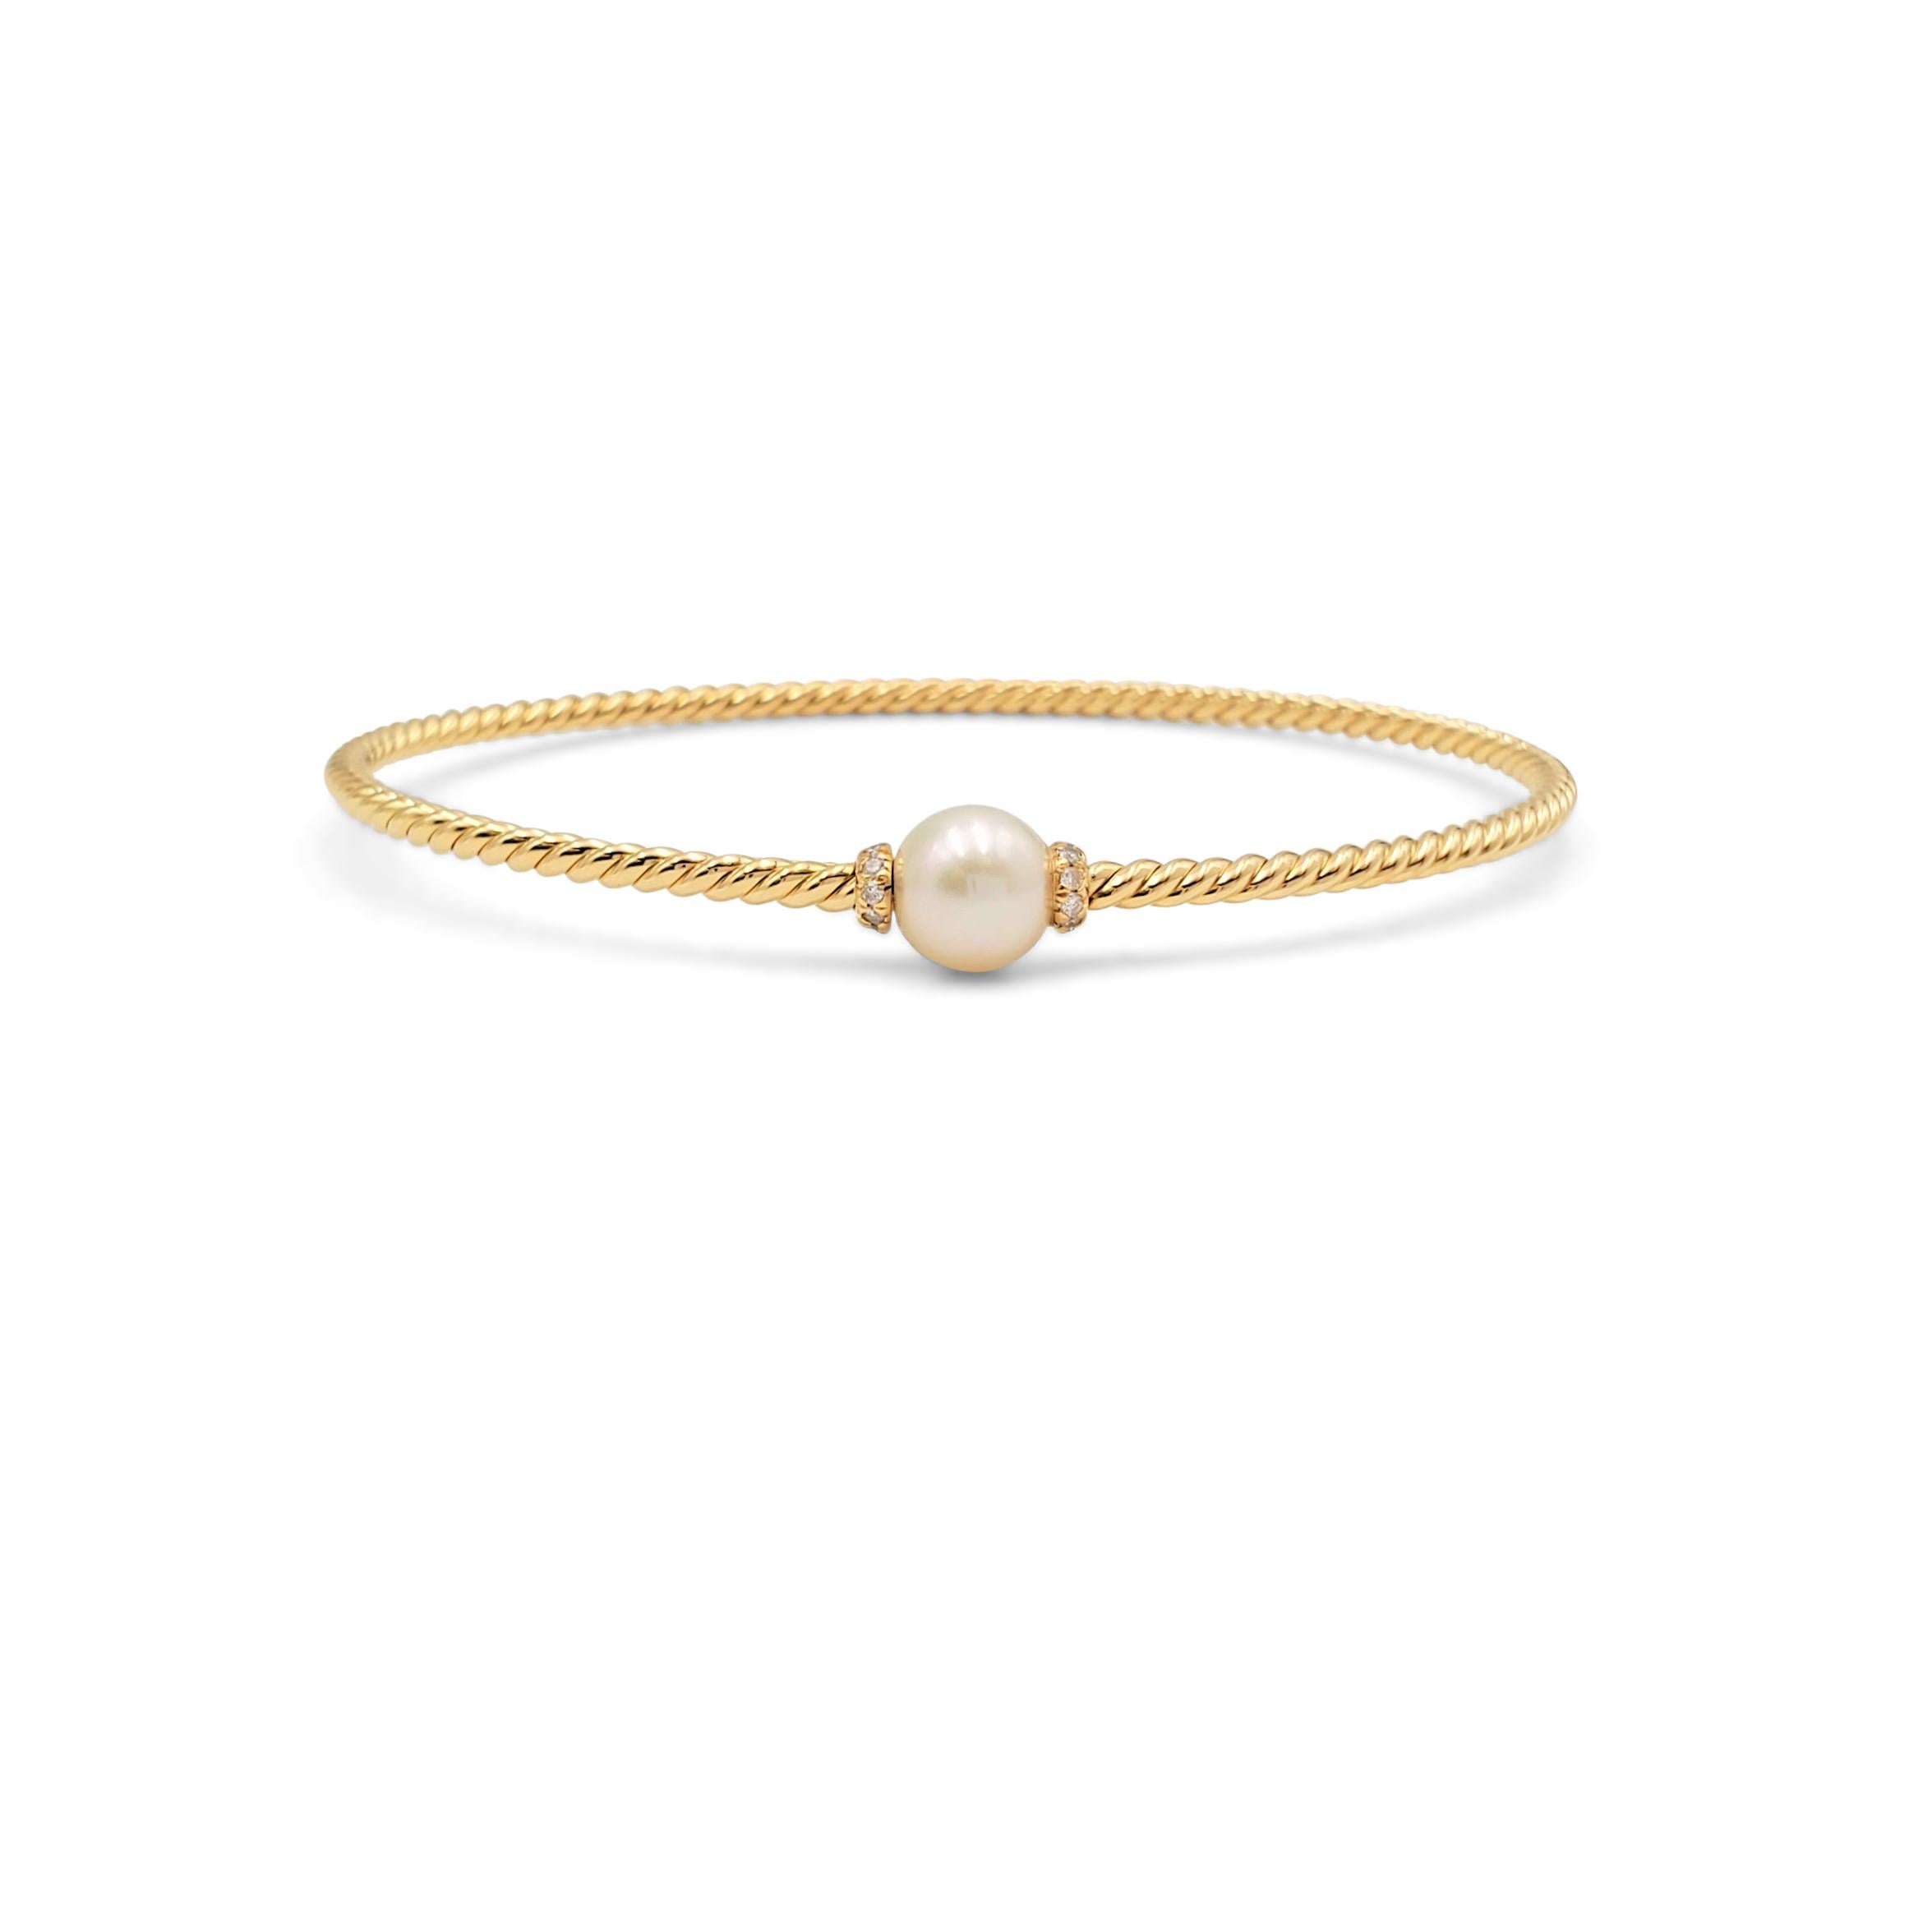 Authentic David Yurman 'Petite Solari' bracelet crafted in 18 karat yellow gold features a single cultured white Ayoka pearl and pave set diamonds weighing an estimated 0.08 carats total weight. The bracelet is completed with a secure magnetic